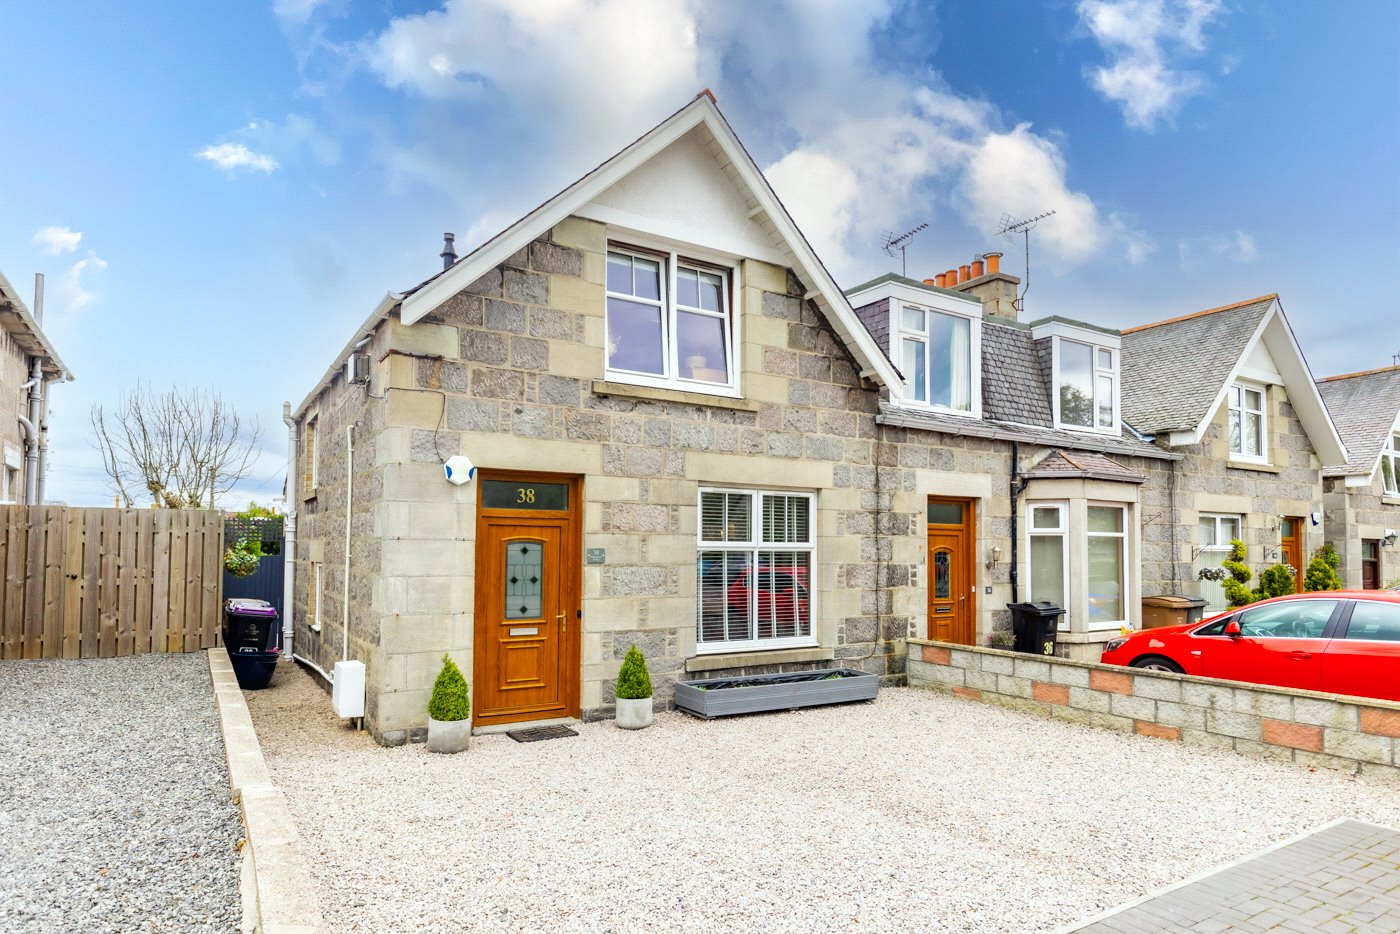 Our latest properties for sale or to let (13th May 2022)